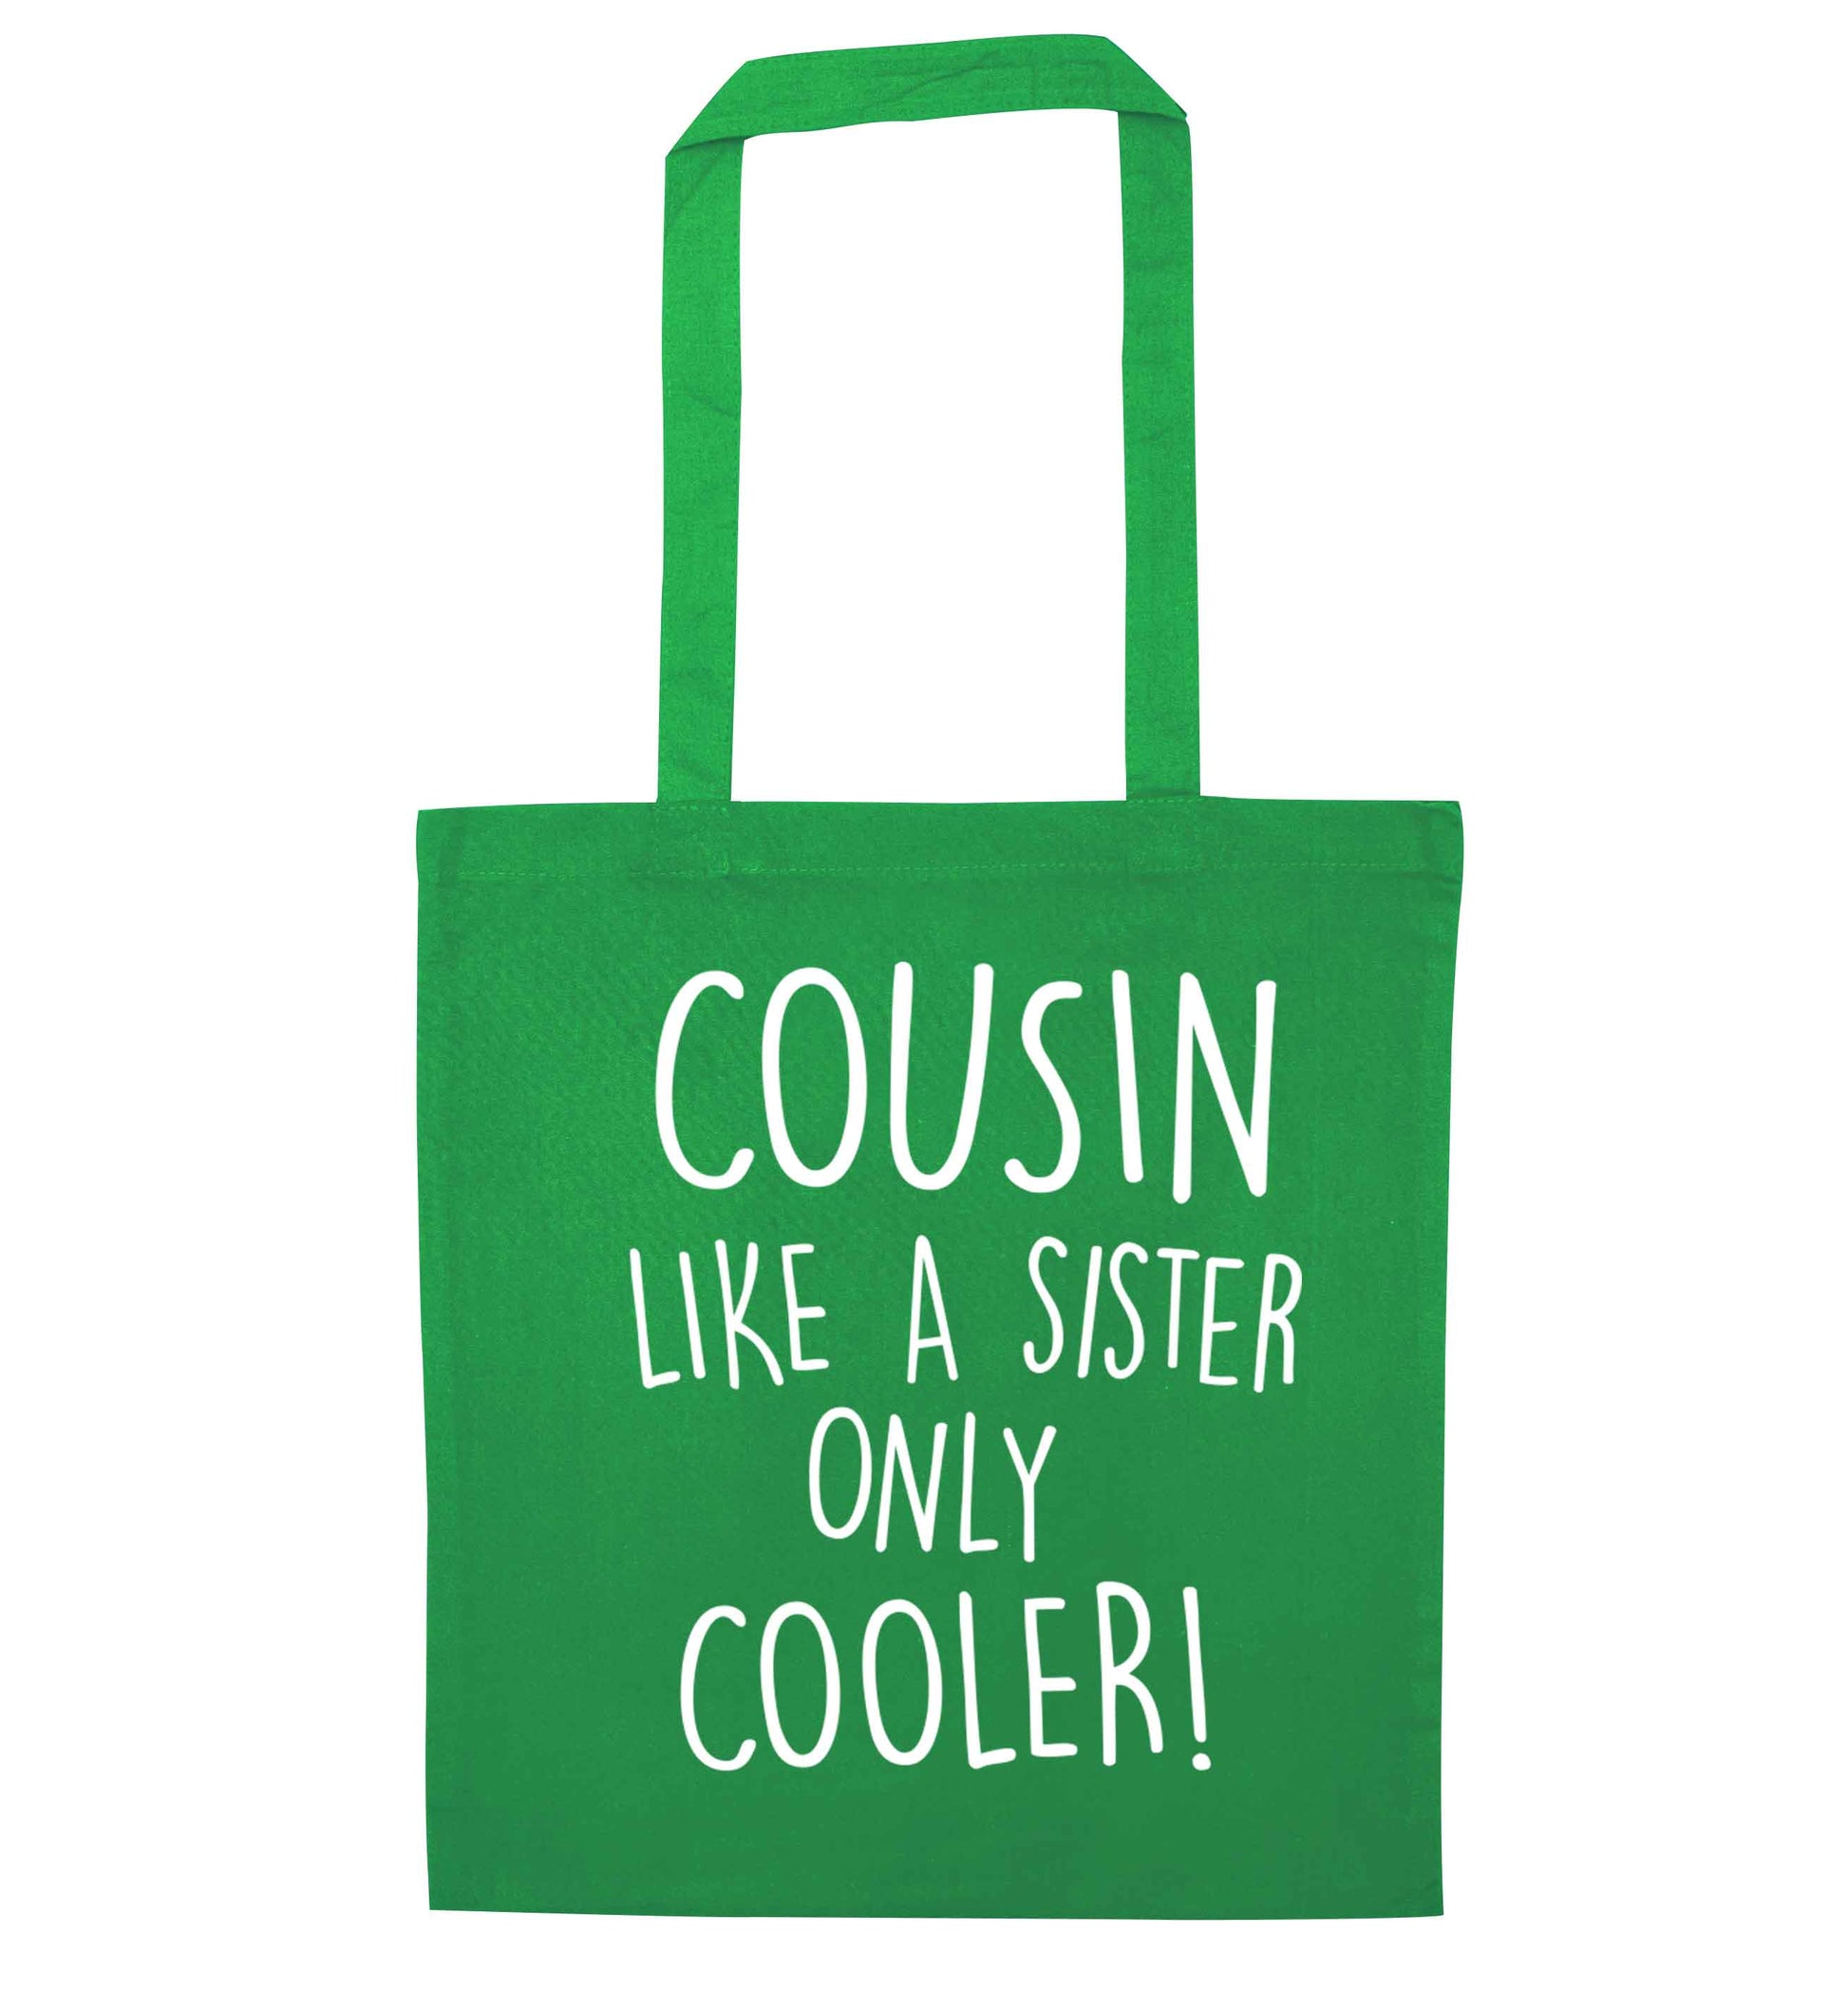 Cousin like a sister only cooler green tote bag